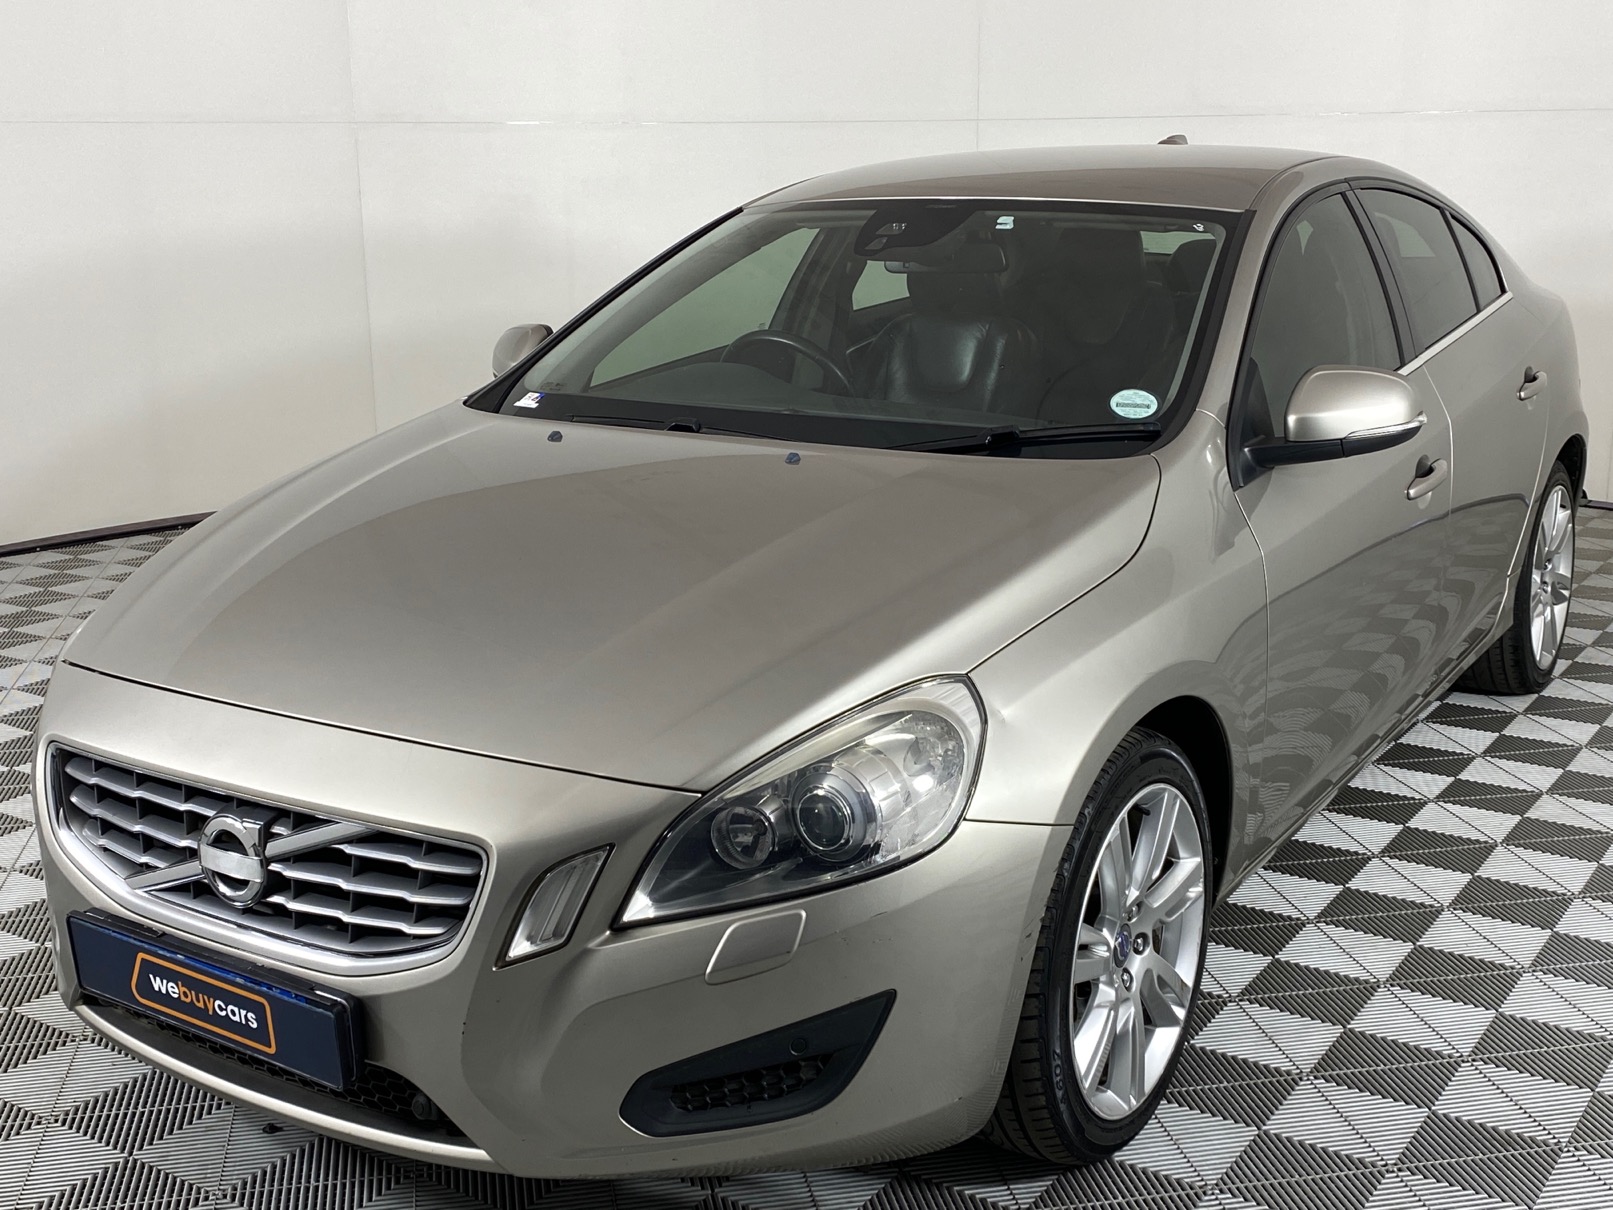 Used 2011 Volvo S60 T3 Essential for sale WeBuyCars